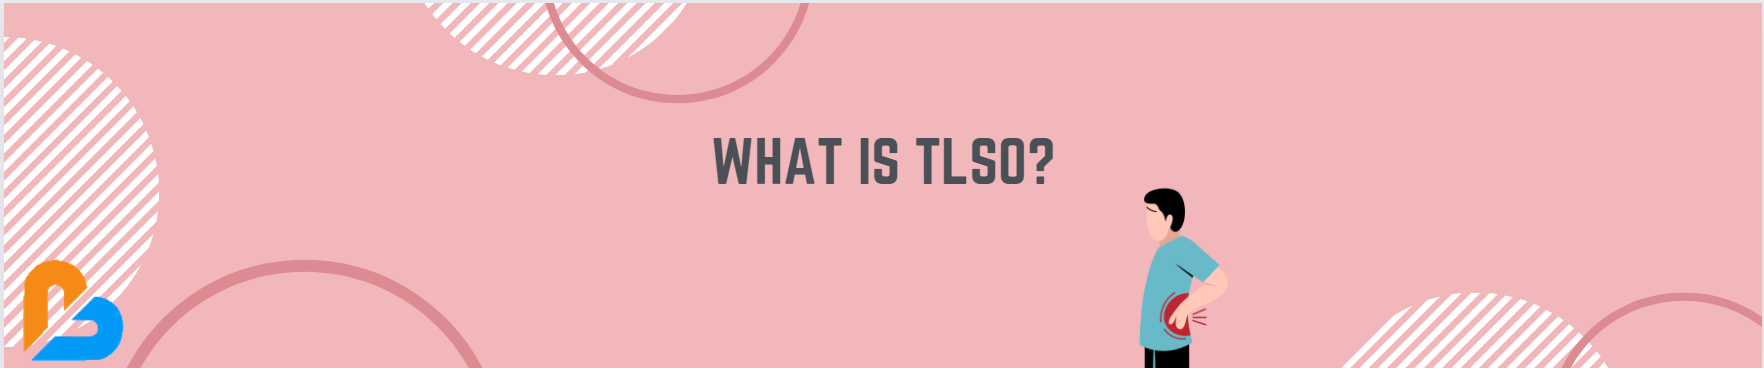 What is TLSO?